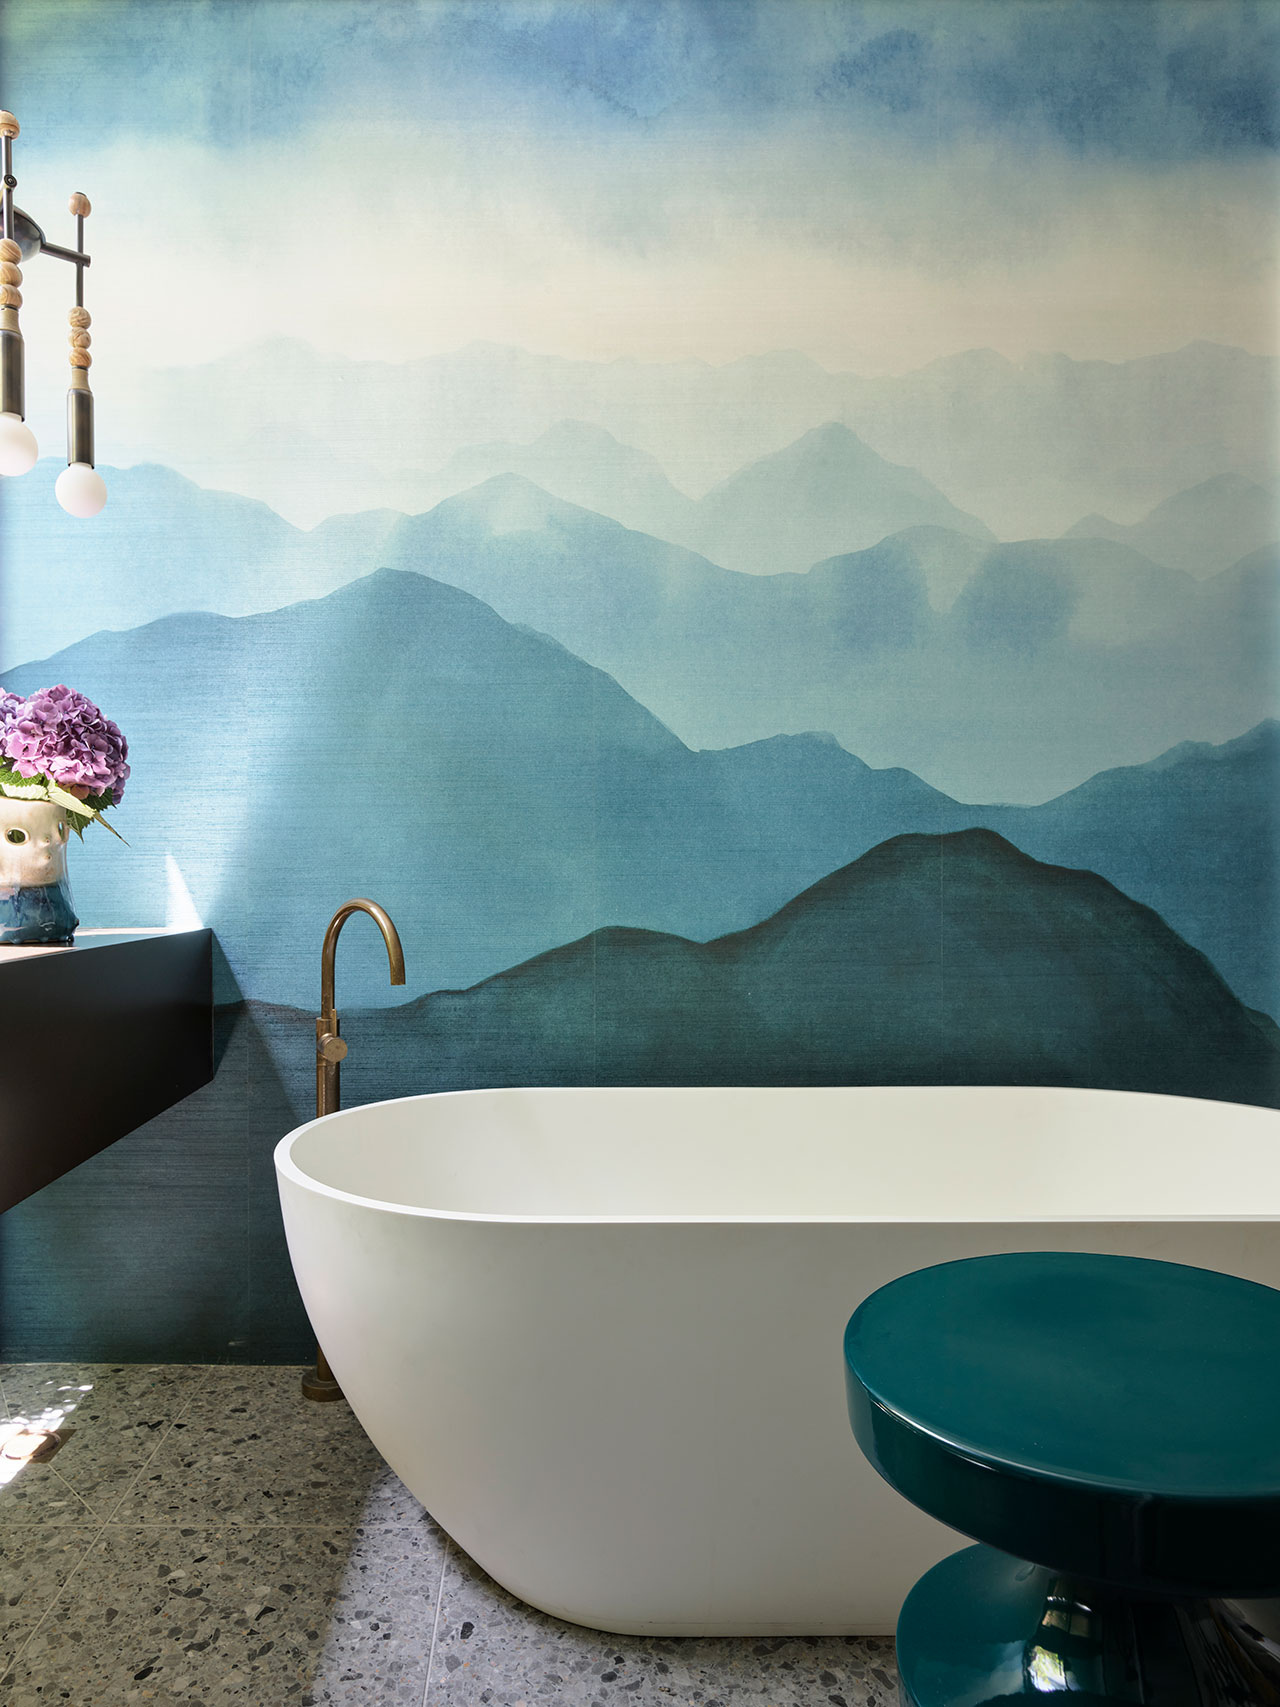 'Yannan' wallpaper by Pierre Frey; 'Bishop Stool' by India Mahdavi.
Photography by Anson Smart.